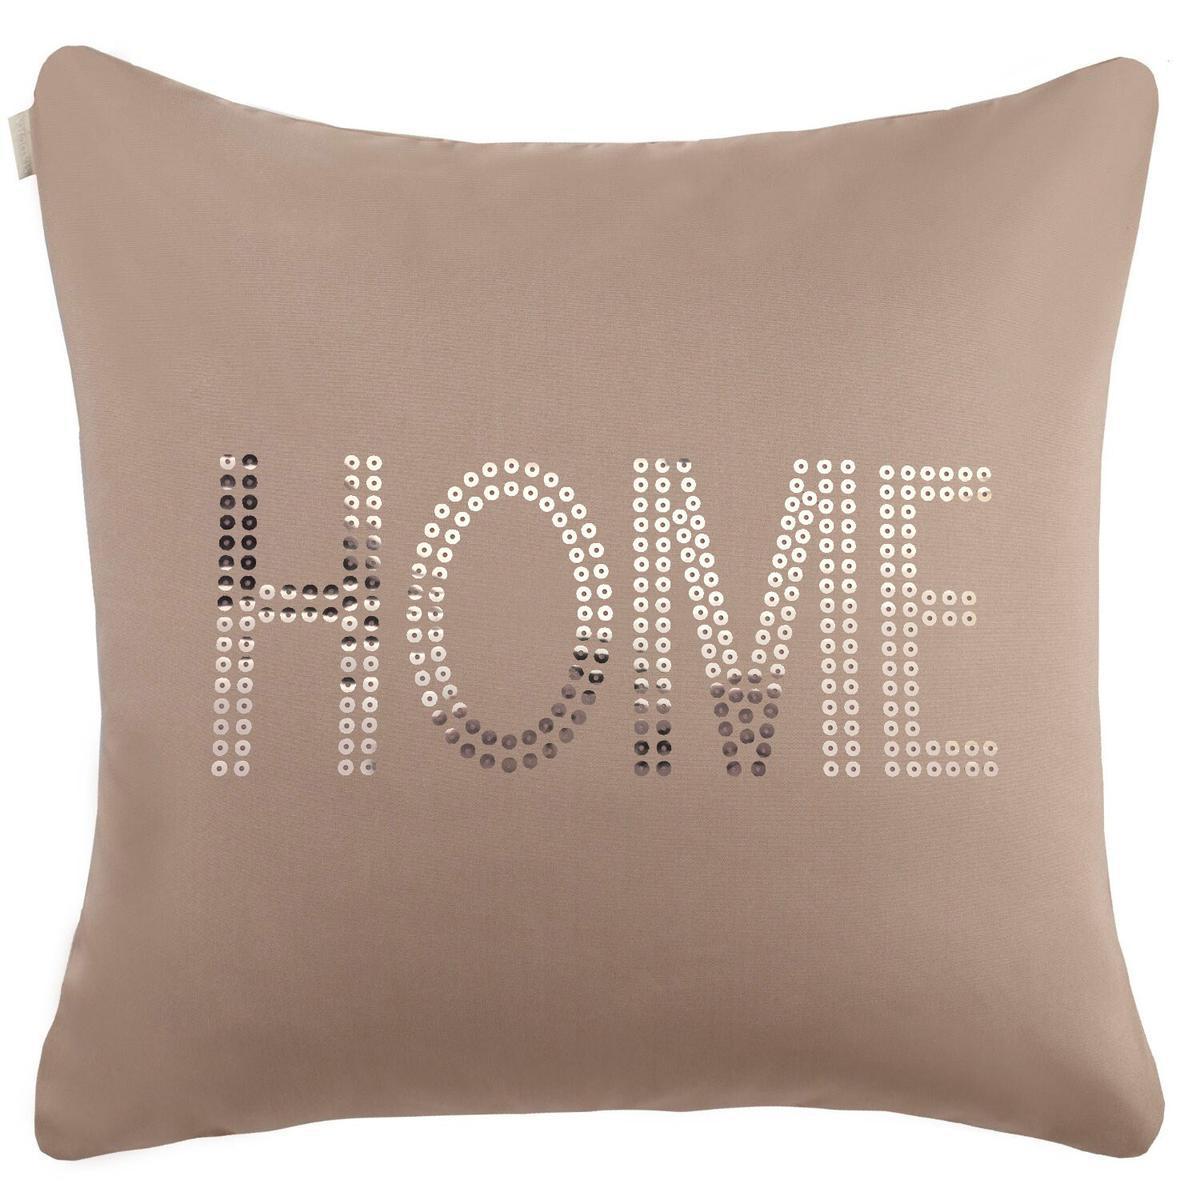 Coussin Home - 100% polyester - 40 x 40 cm - Taupe